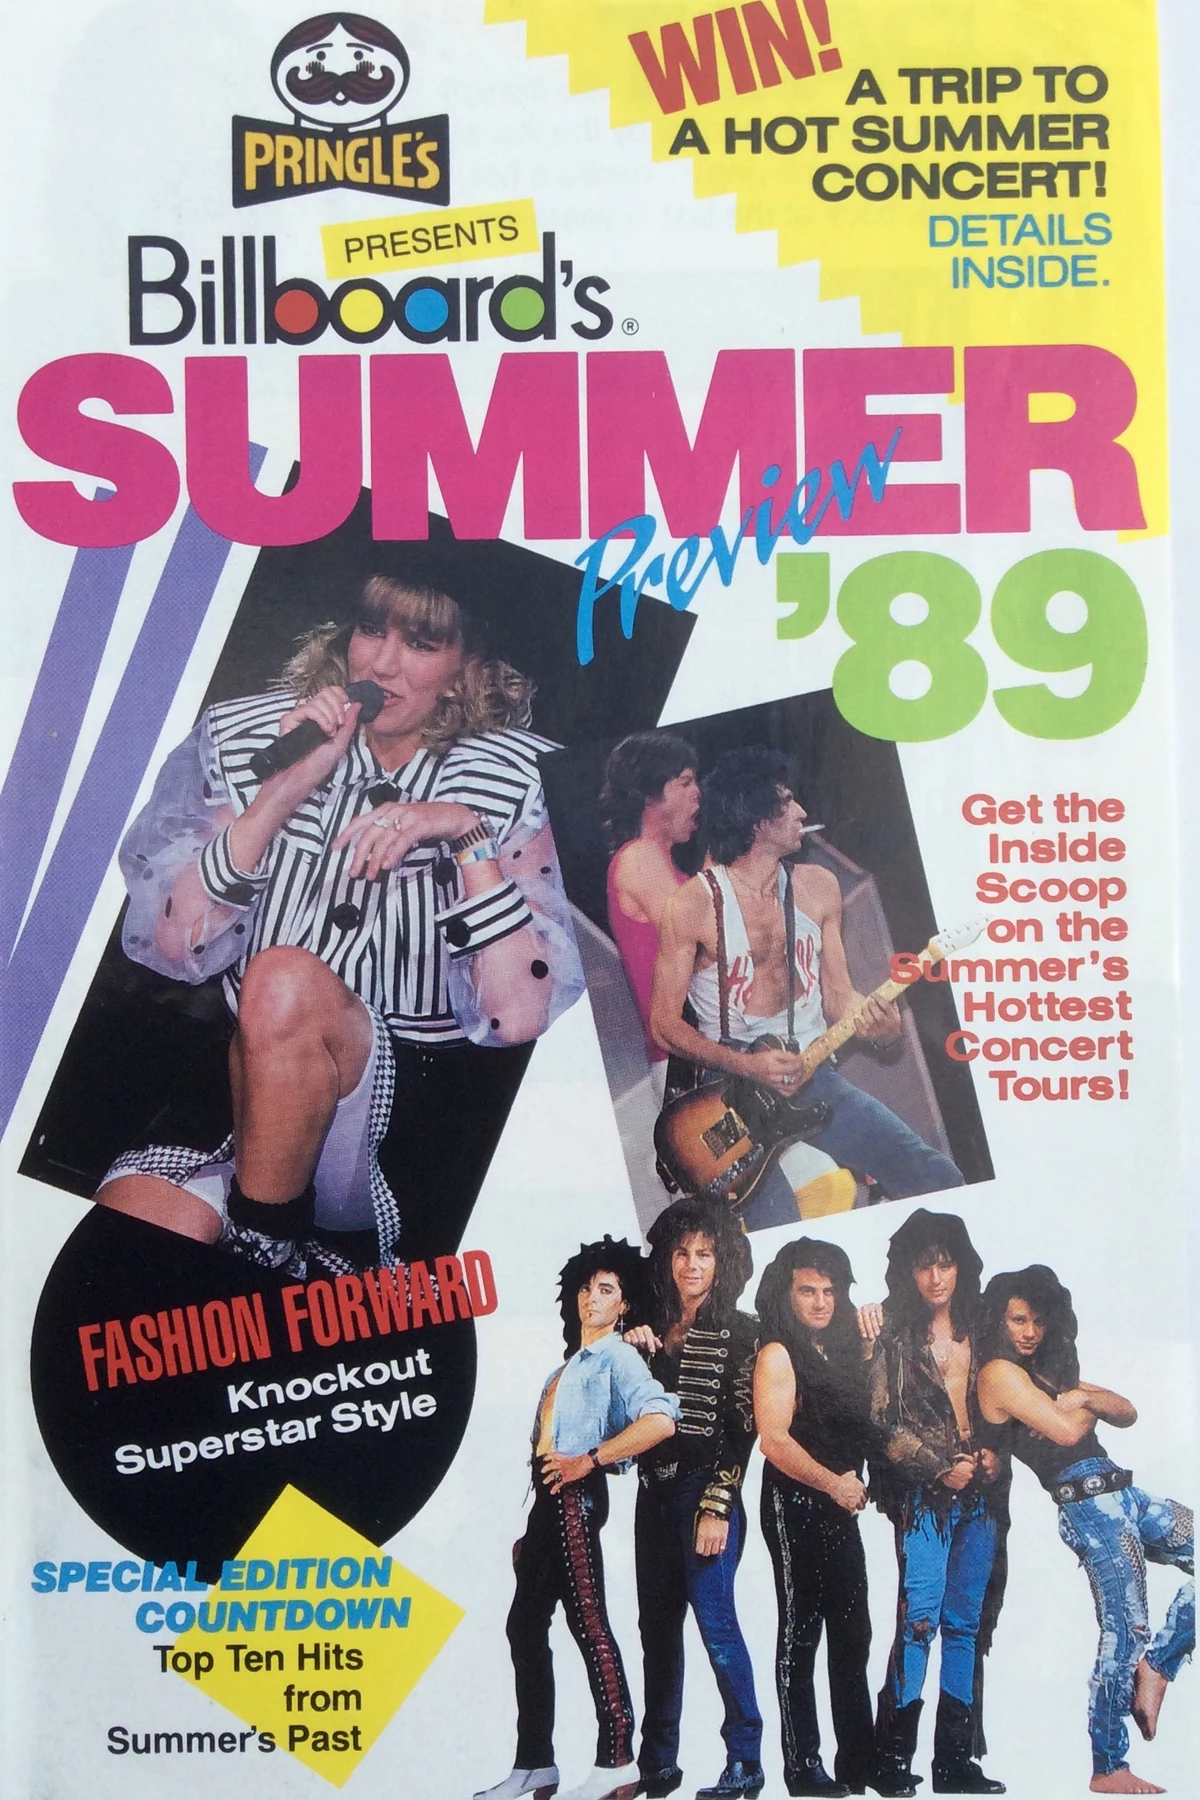 Download Late 80's "Songs Of Summer" as seen in 1989